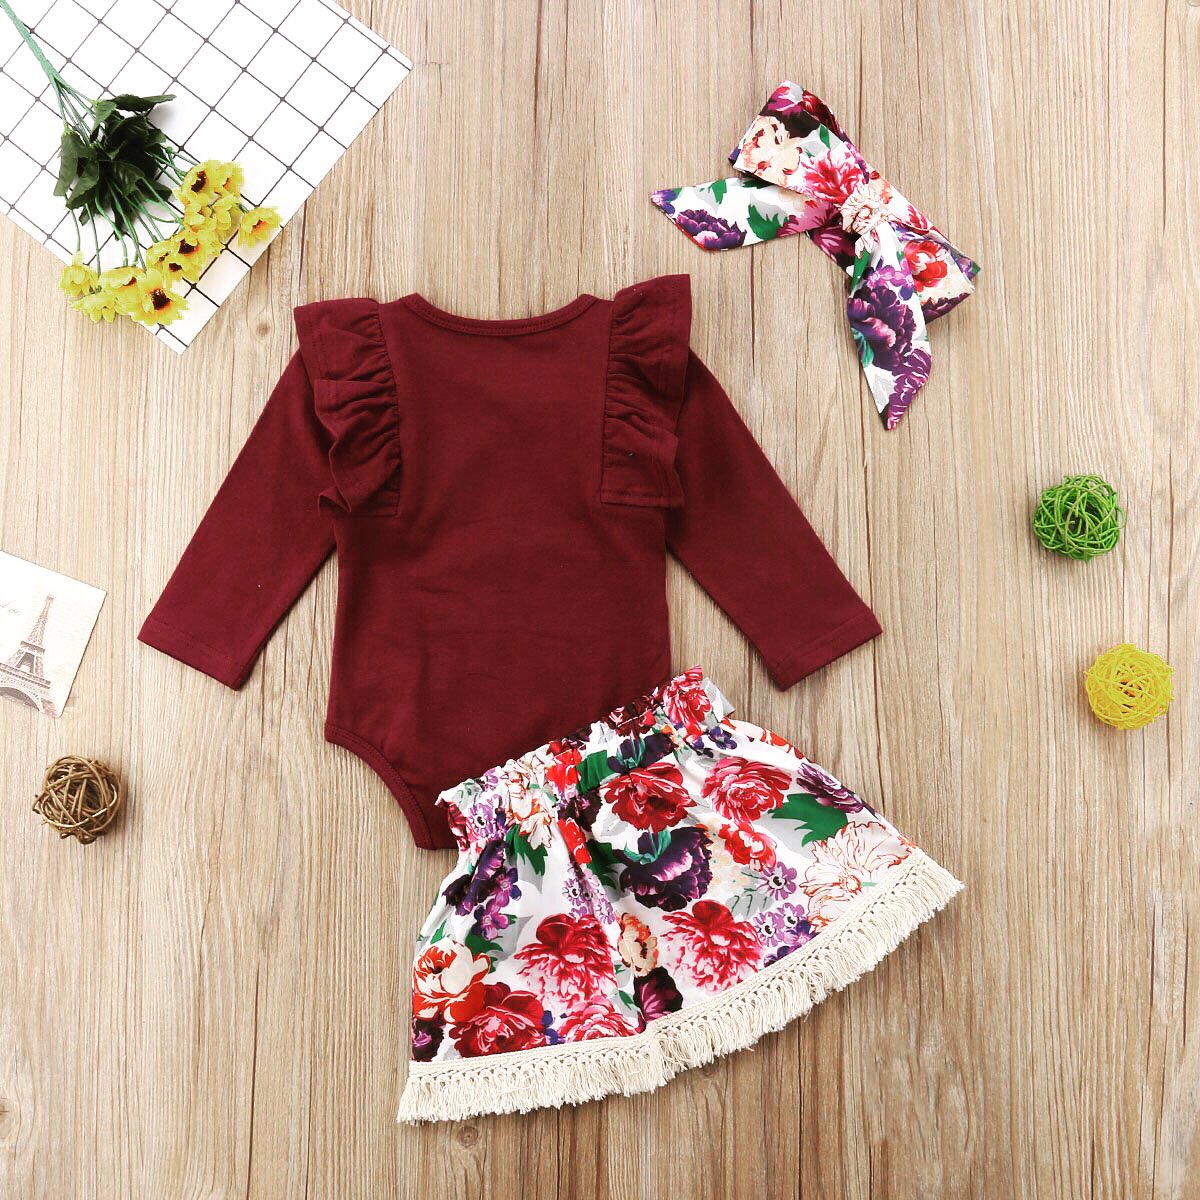 Our Autumn Floral Romper Set Wear✨🍂 Amazing set comes with our favorite set bow headband 🎀 😍  Tap Shop 👇🛍👇for this cute girls set wear only at 👉 shopkidswear.com #AutumnFashion #KidsFashion #RomperSet #KidsClothingStore #TrendsettersKids #ShopKidsWear